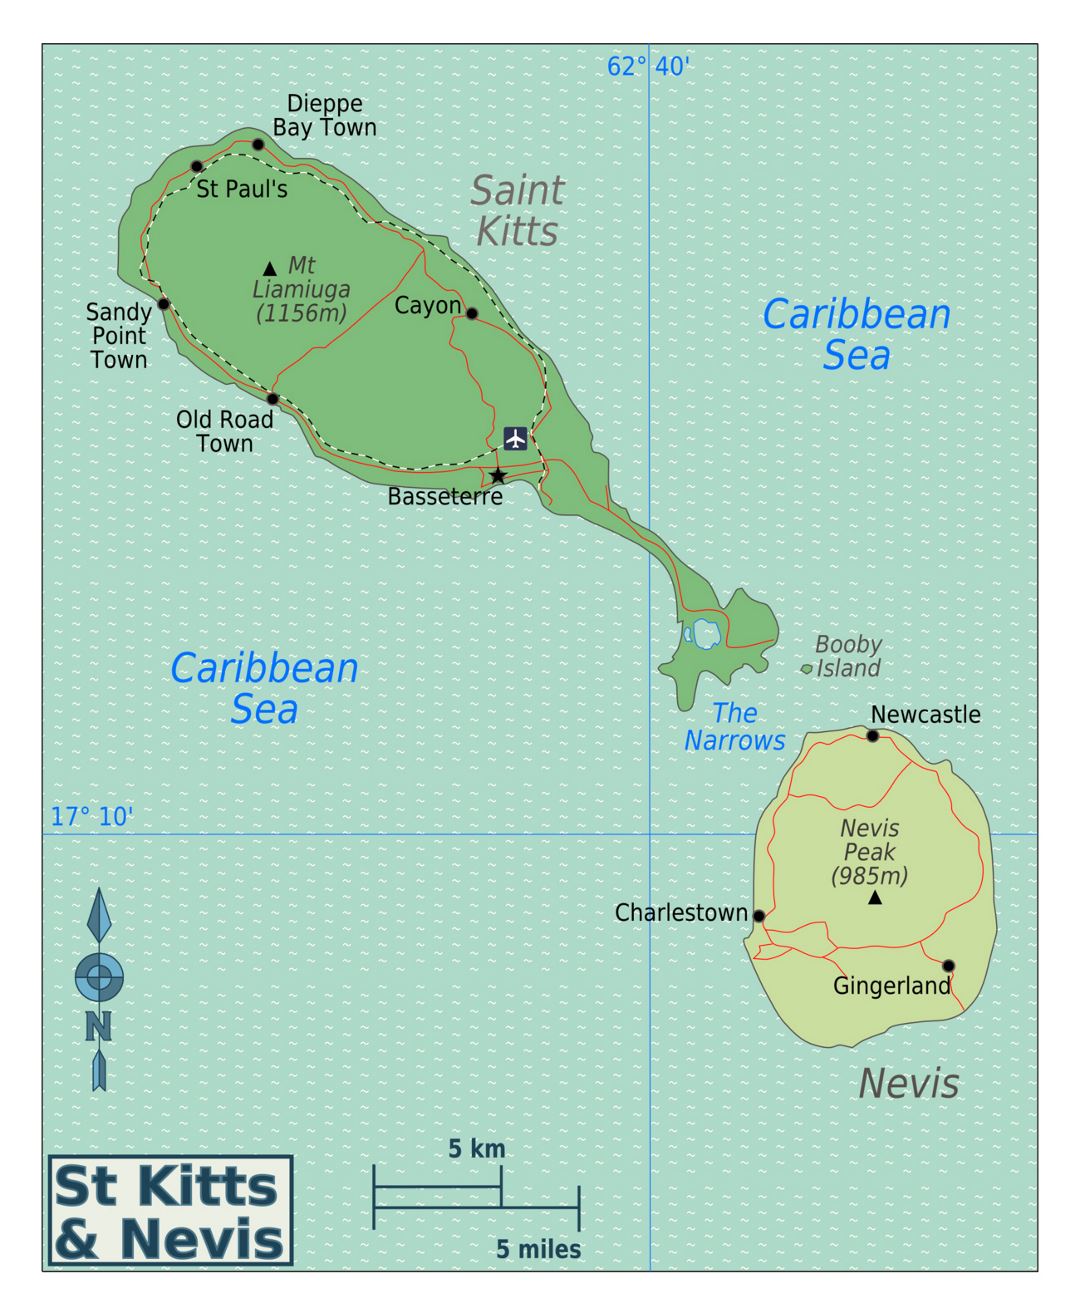 Large regions map of Saint Kitts and Nevis with other marks